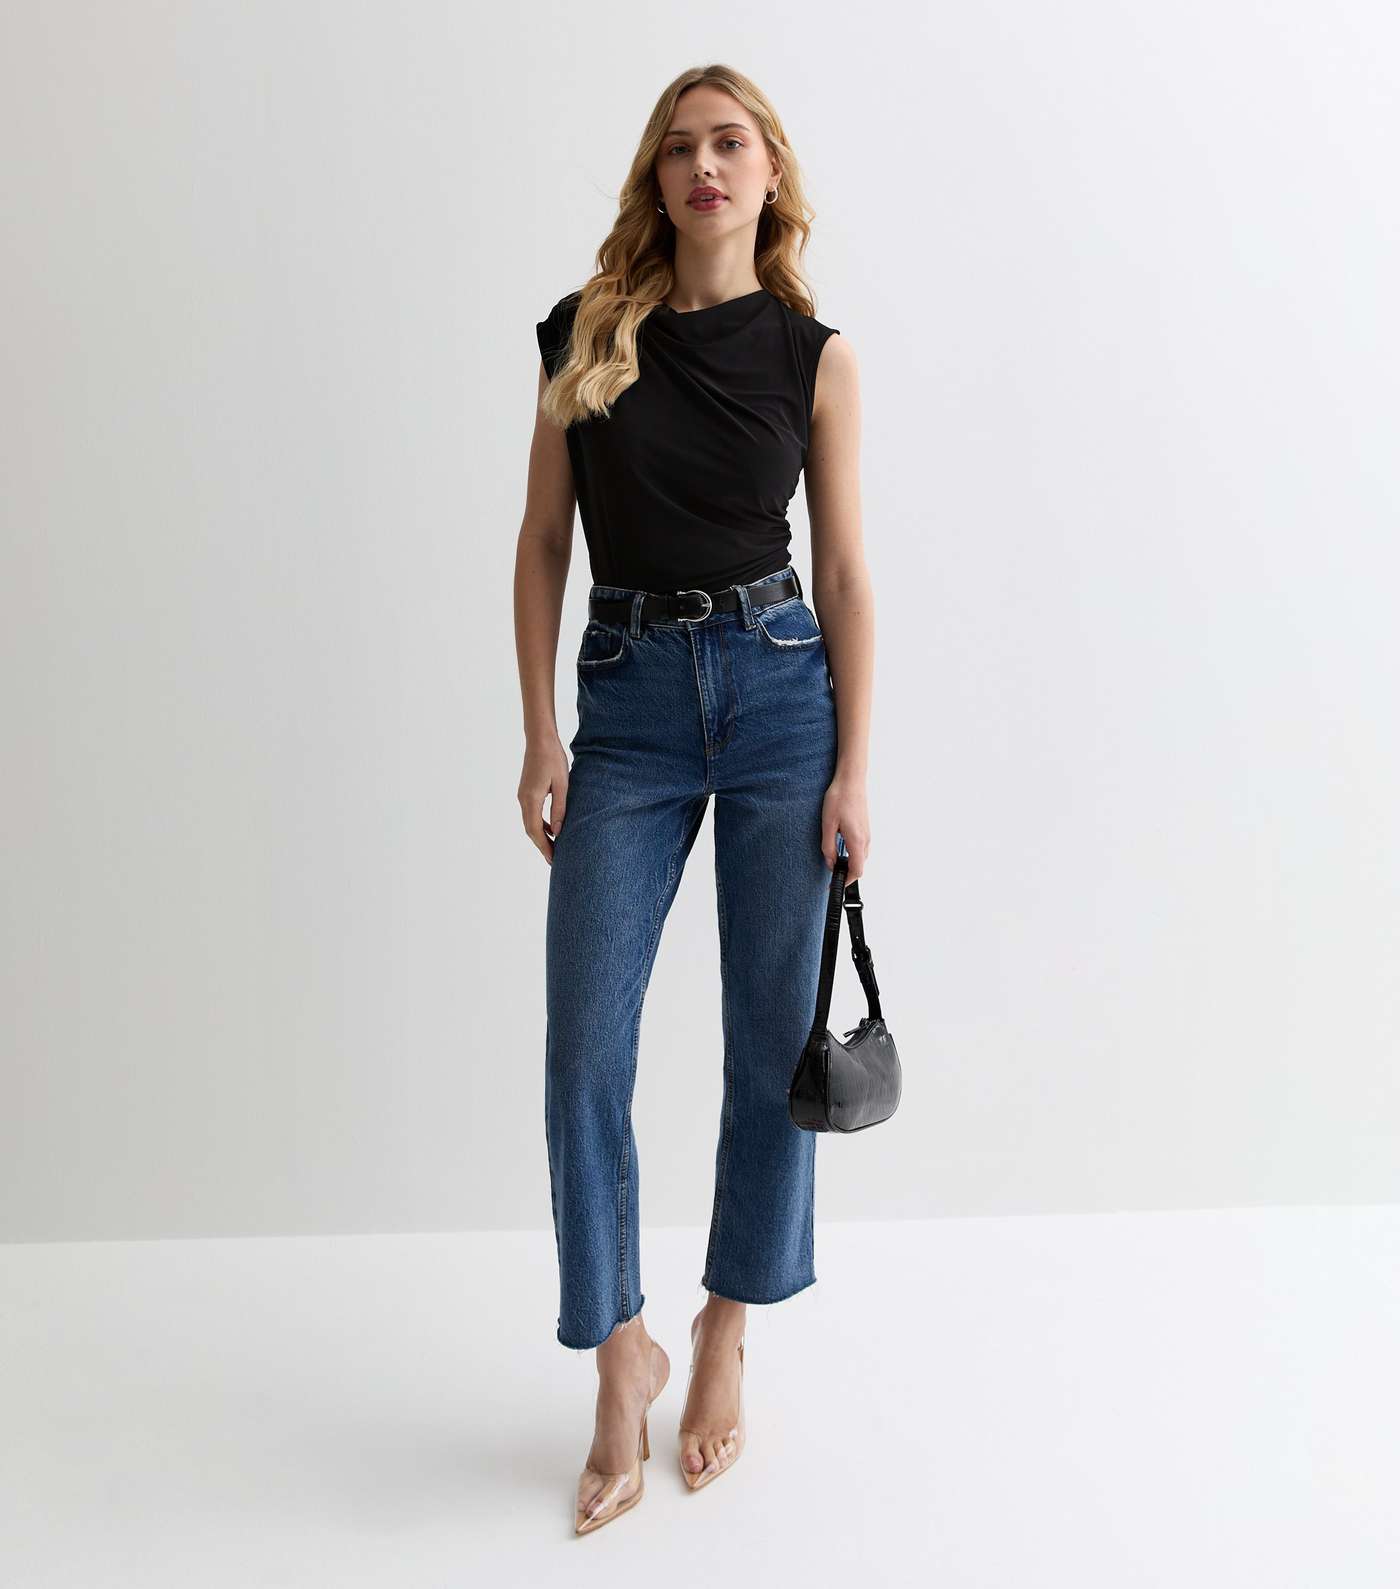 Black Sleeveless Ruched Top Image 3